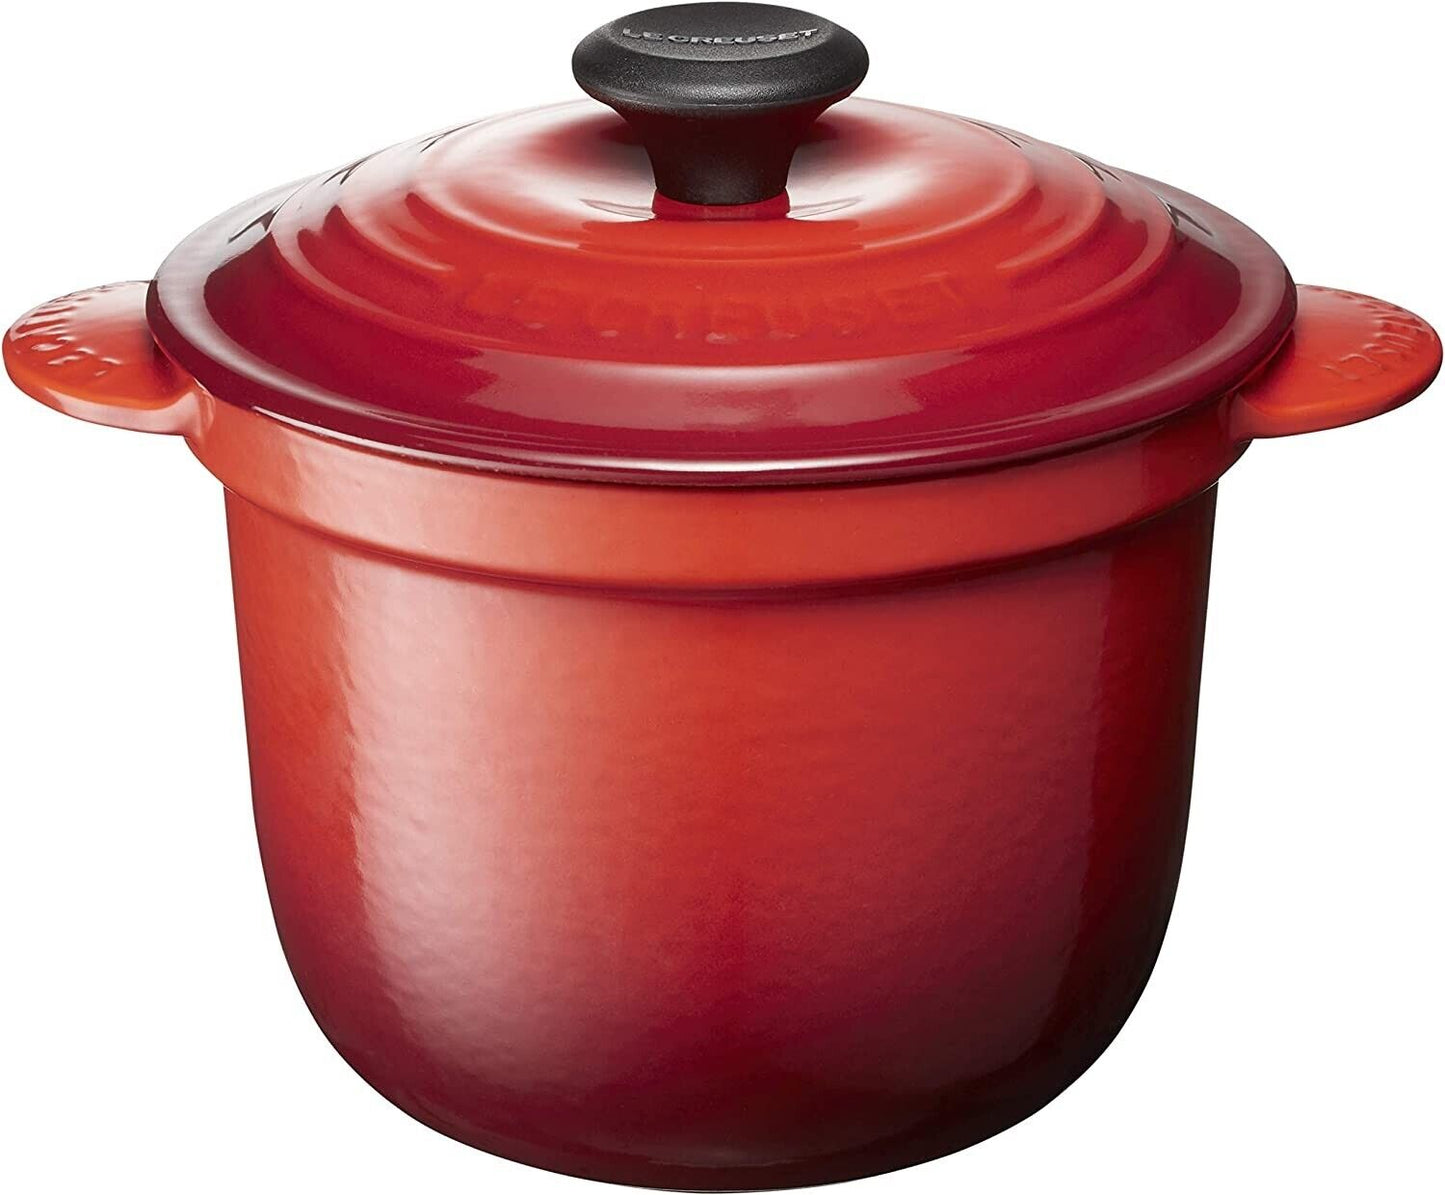 Le Creuset Cocotte Every 18 Cherry Red 2L 18cm Japan New